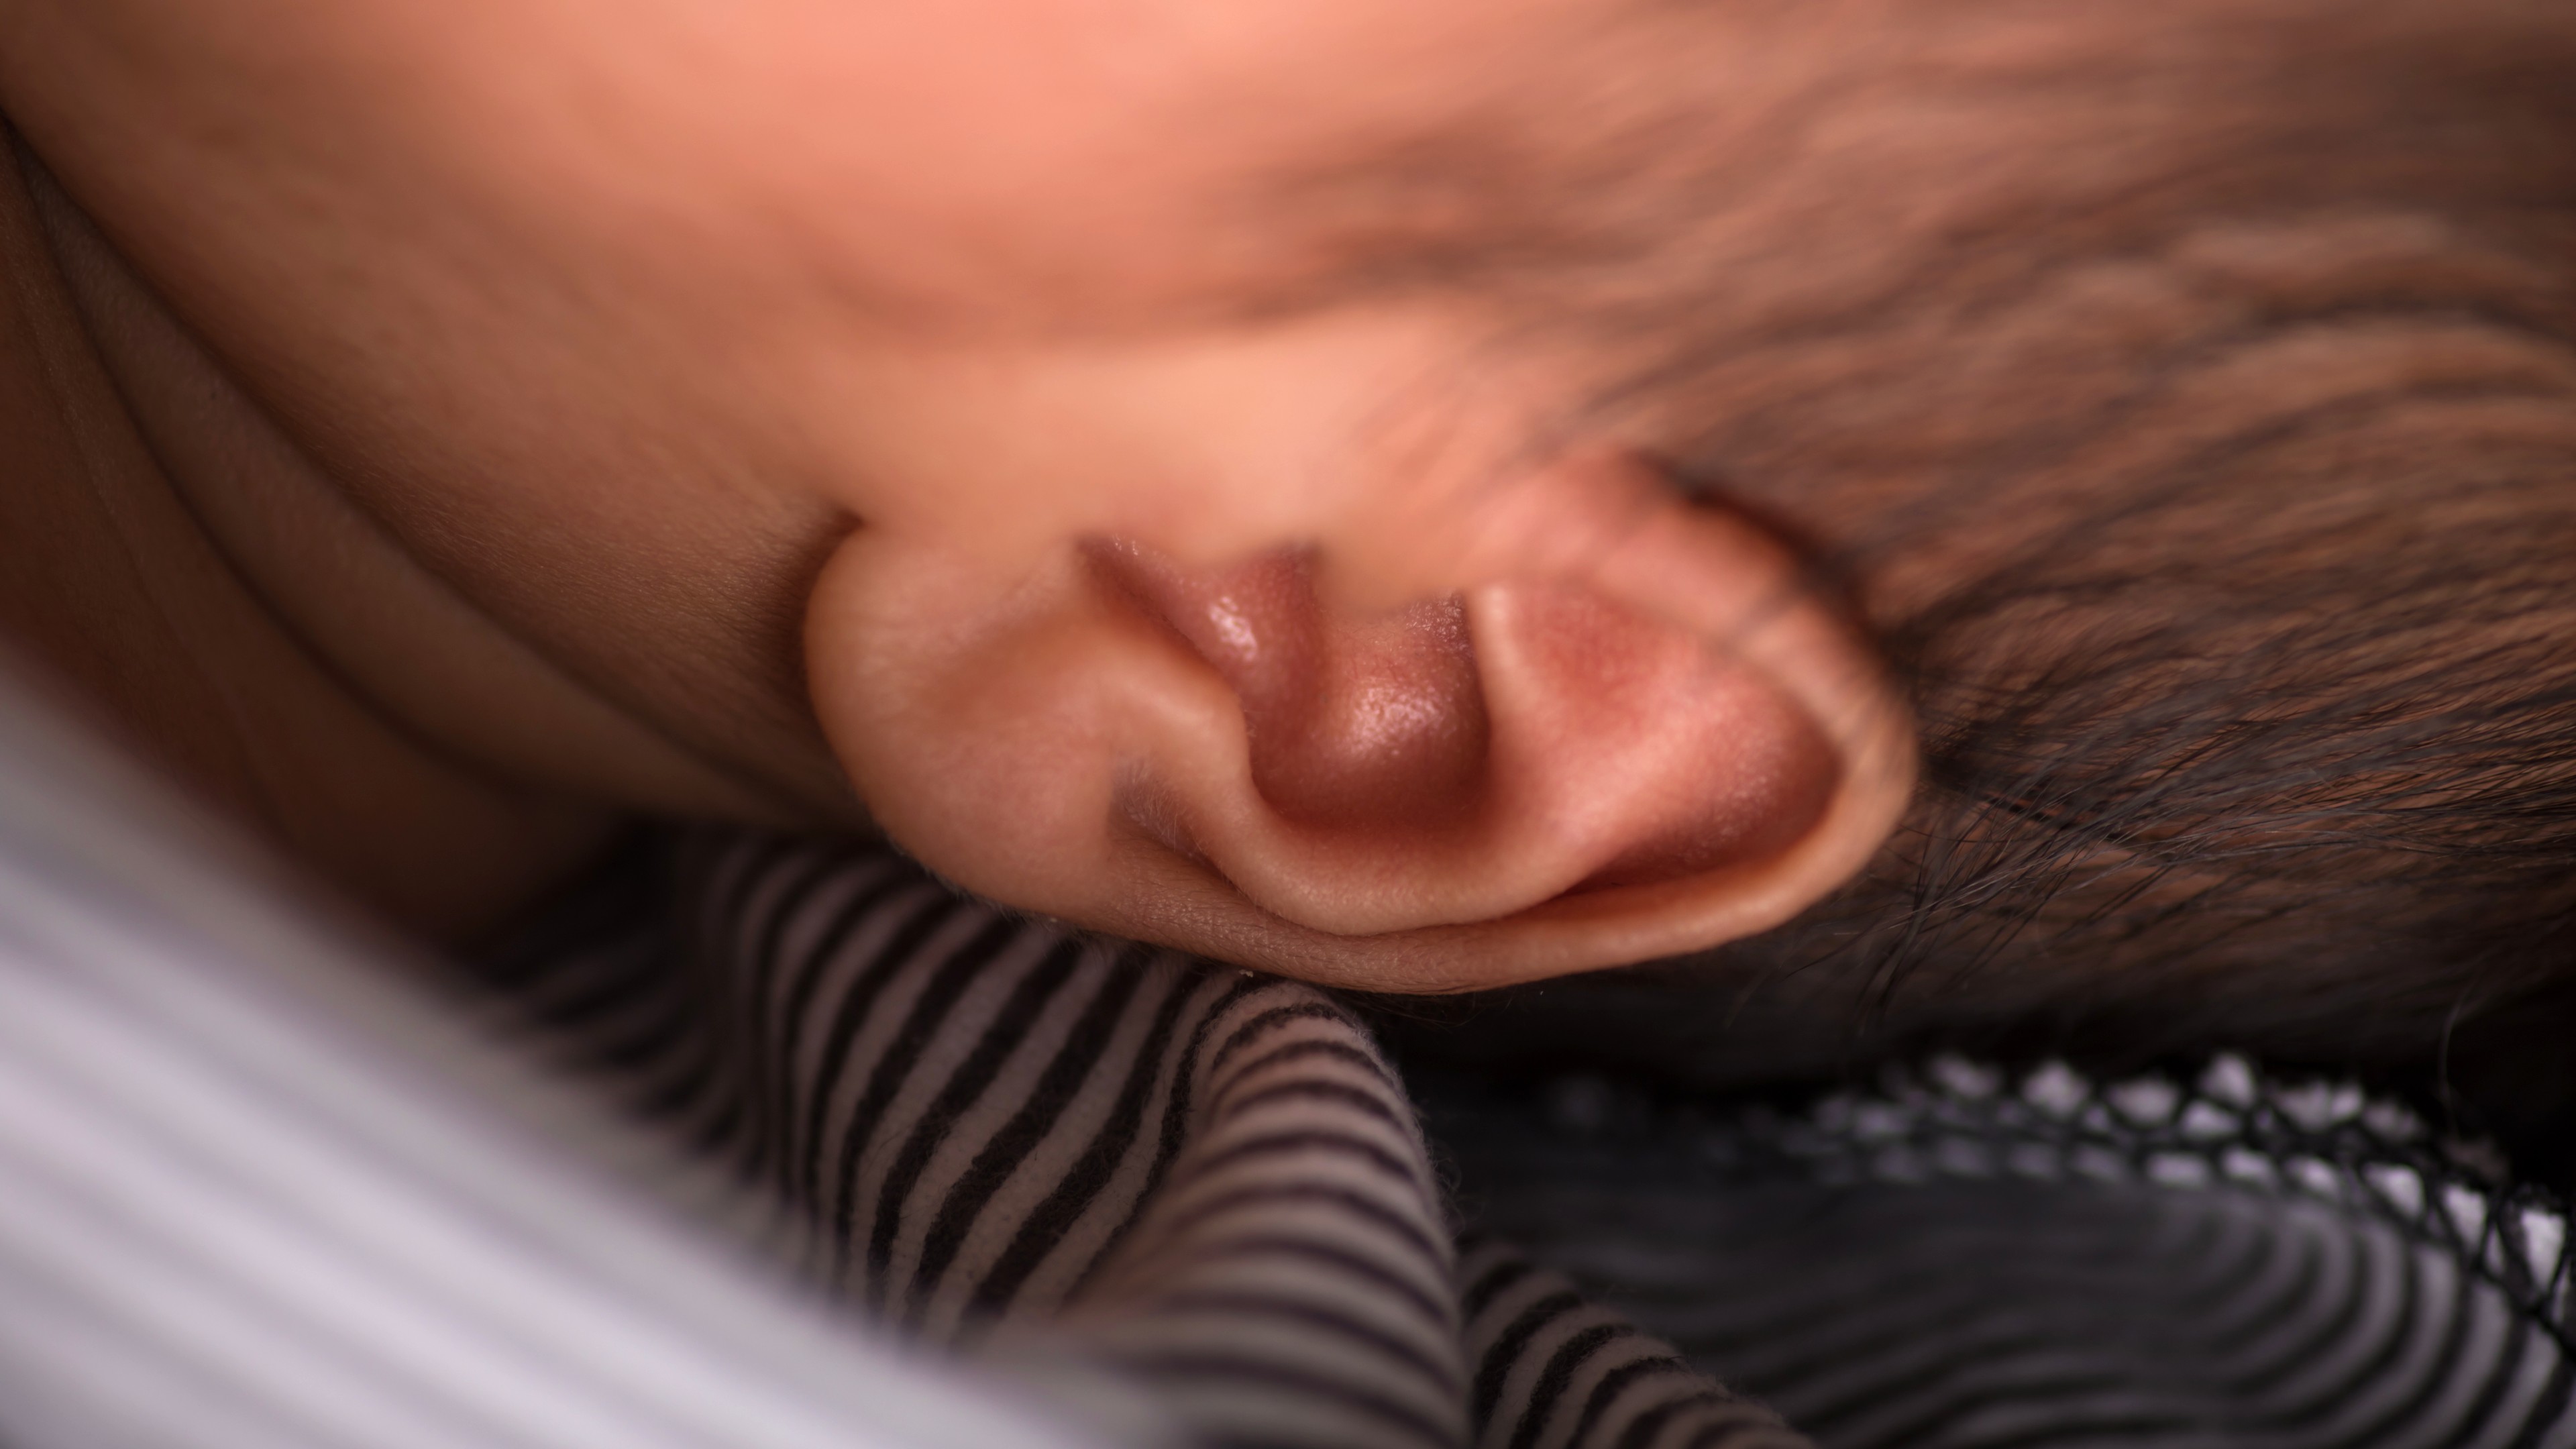 Close-up image of a baby's ear as the baby rests its head against a striped fabric, capturing the tender moments when they first start to absorb the language around them.